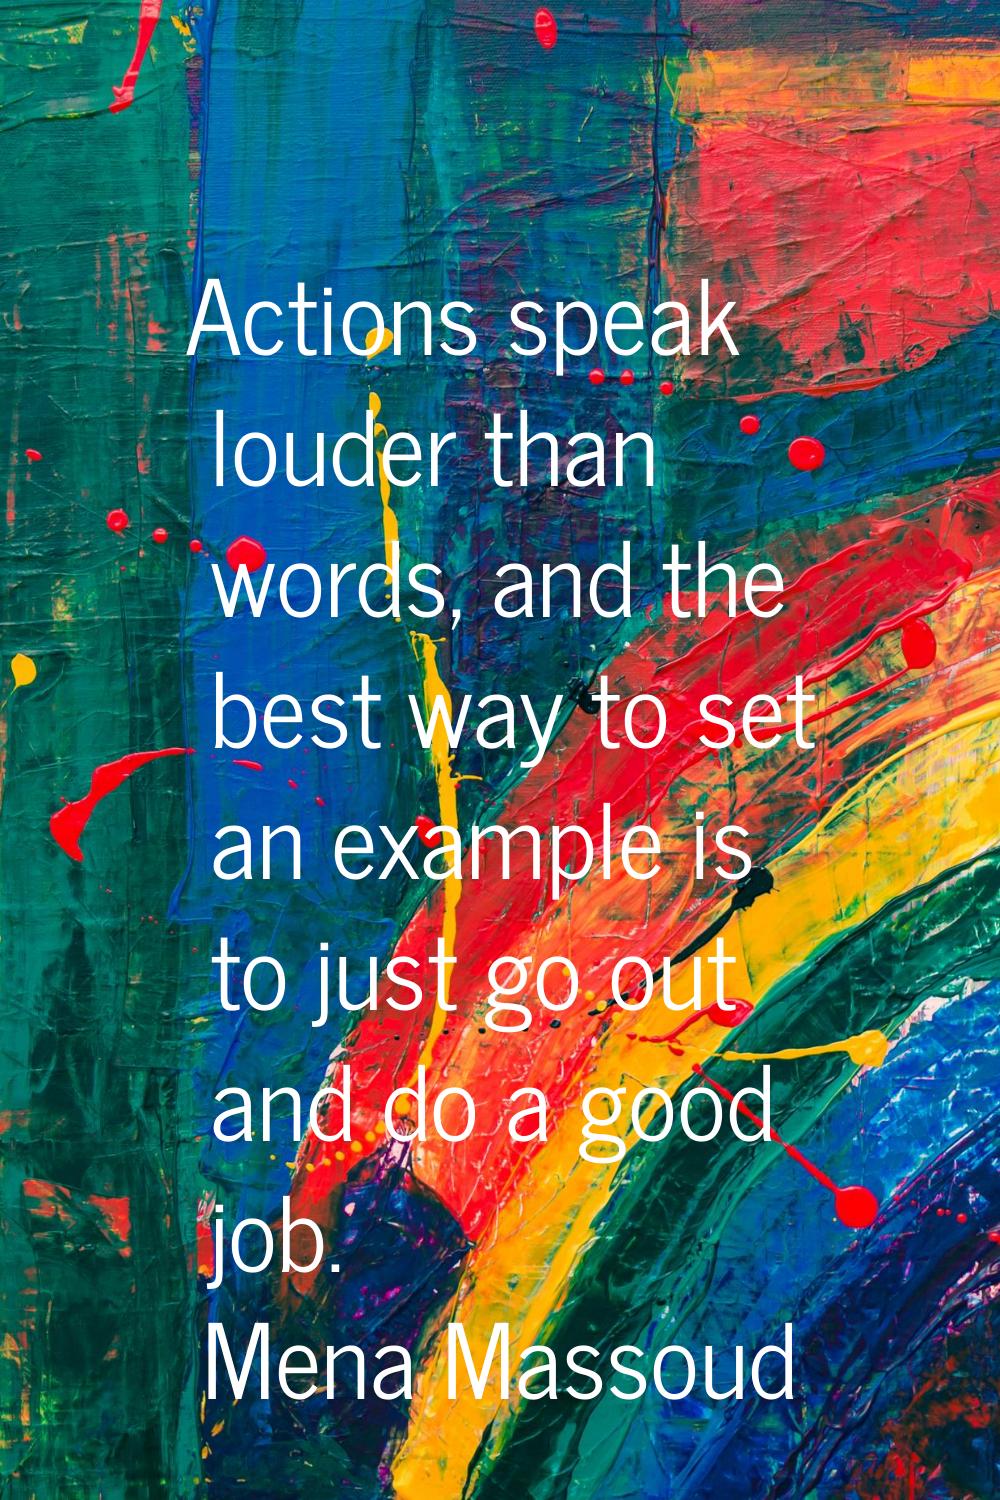 Actions speak louder than words, and the best way to set an example is to just go out and do a good